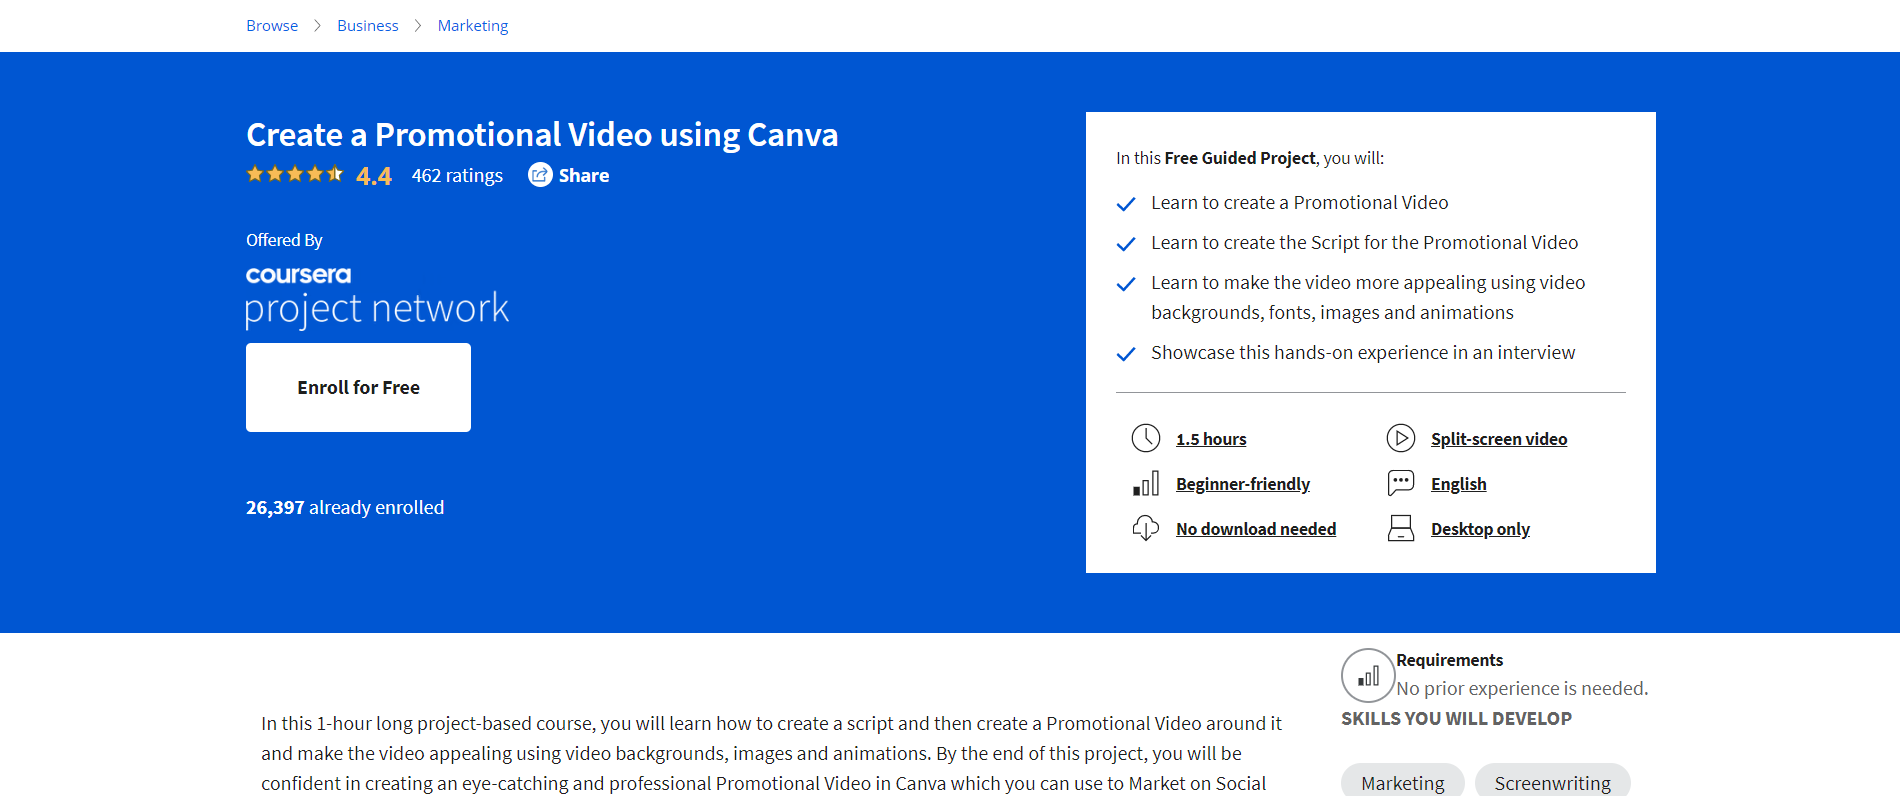 Create a Promotional Video Using Canva